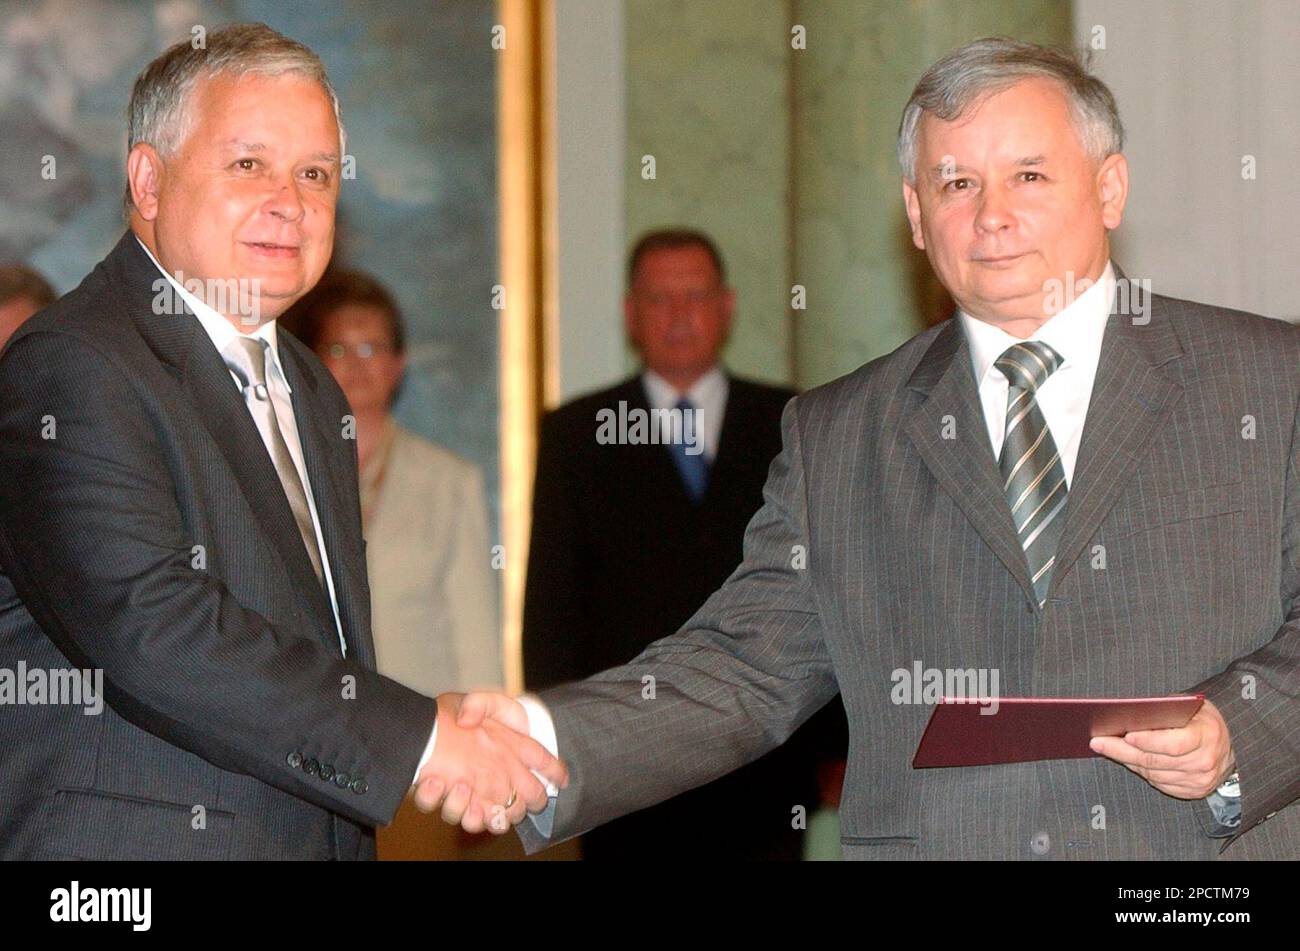 Polish President Lech Kaczynski, left, shakes hands with his twin brother Jaroslaw Kaczynski, after naming him Poland's new Prime Minister, in Warsaw, Poland, Monday, July 10, 2006. Jaroslaw Kaczynski, leader of the ruling Law and Justice party took the prime minister's office after Kazimierz Marcinkiewicz resigned. (AP Photo/Alik Keplicz) Stock Photo